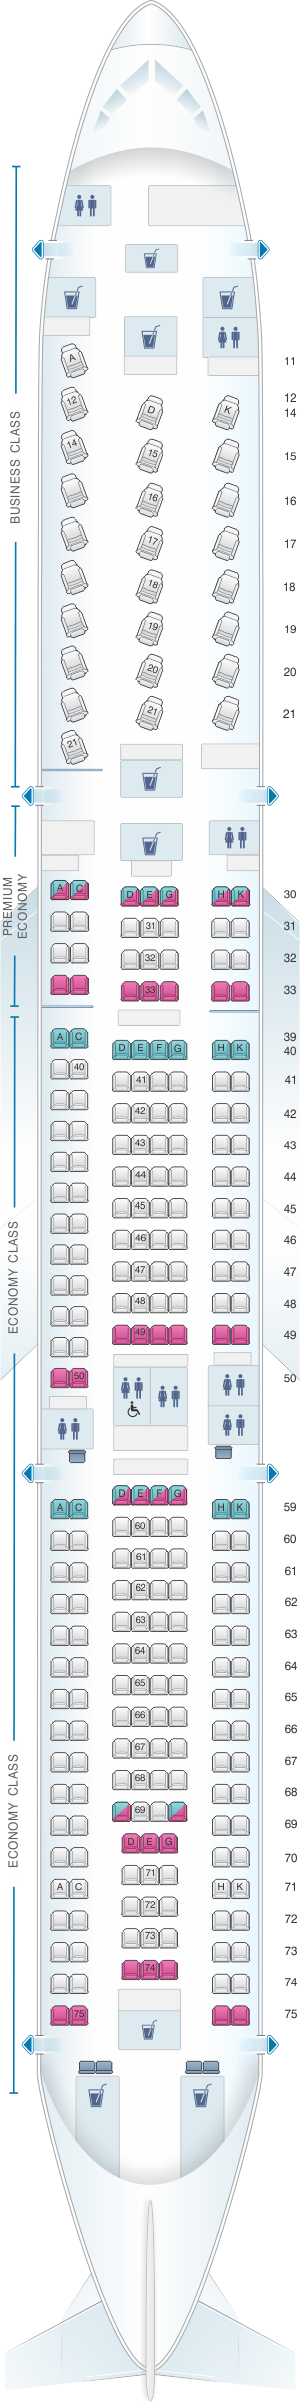 Seat map for Cathay Pacific Airways Airbus A340 300 (34J)